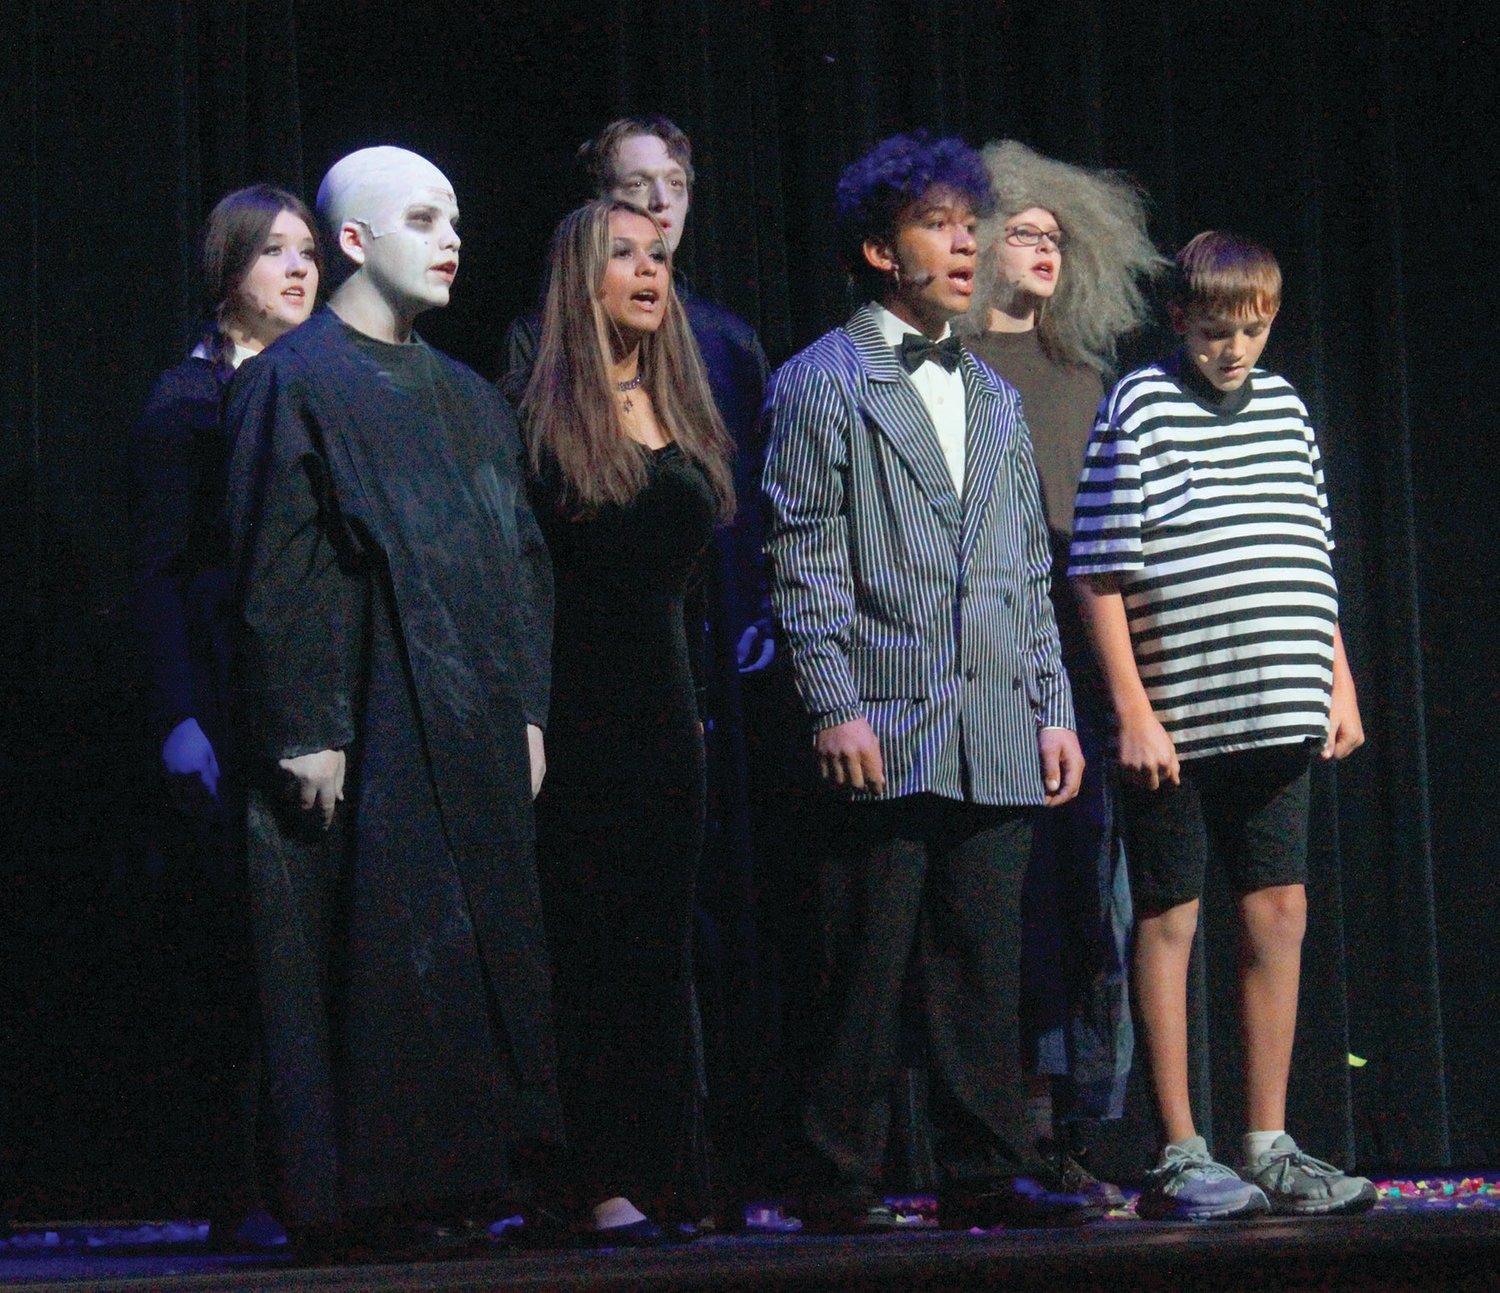 The Addams family during their opening number.